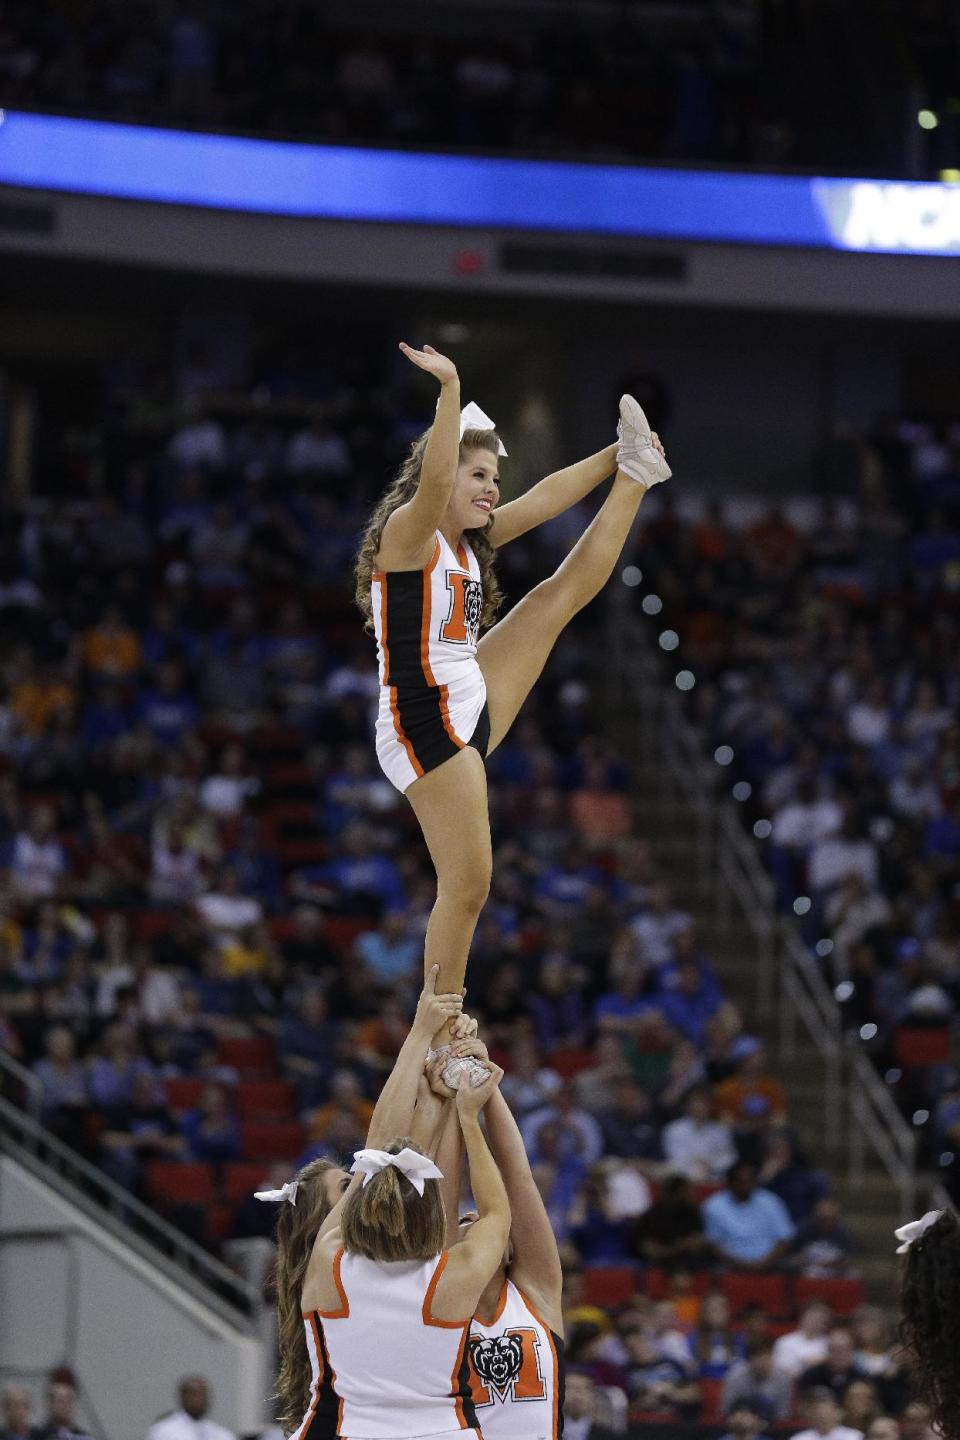 Mercer cheerleaders perform during the first half of an NCAA college basketball second-round game against Duke, Friday, March 21, 2014, in Raleigh, N.C. (AP Photo/Chuck Burton)